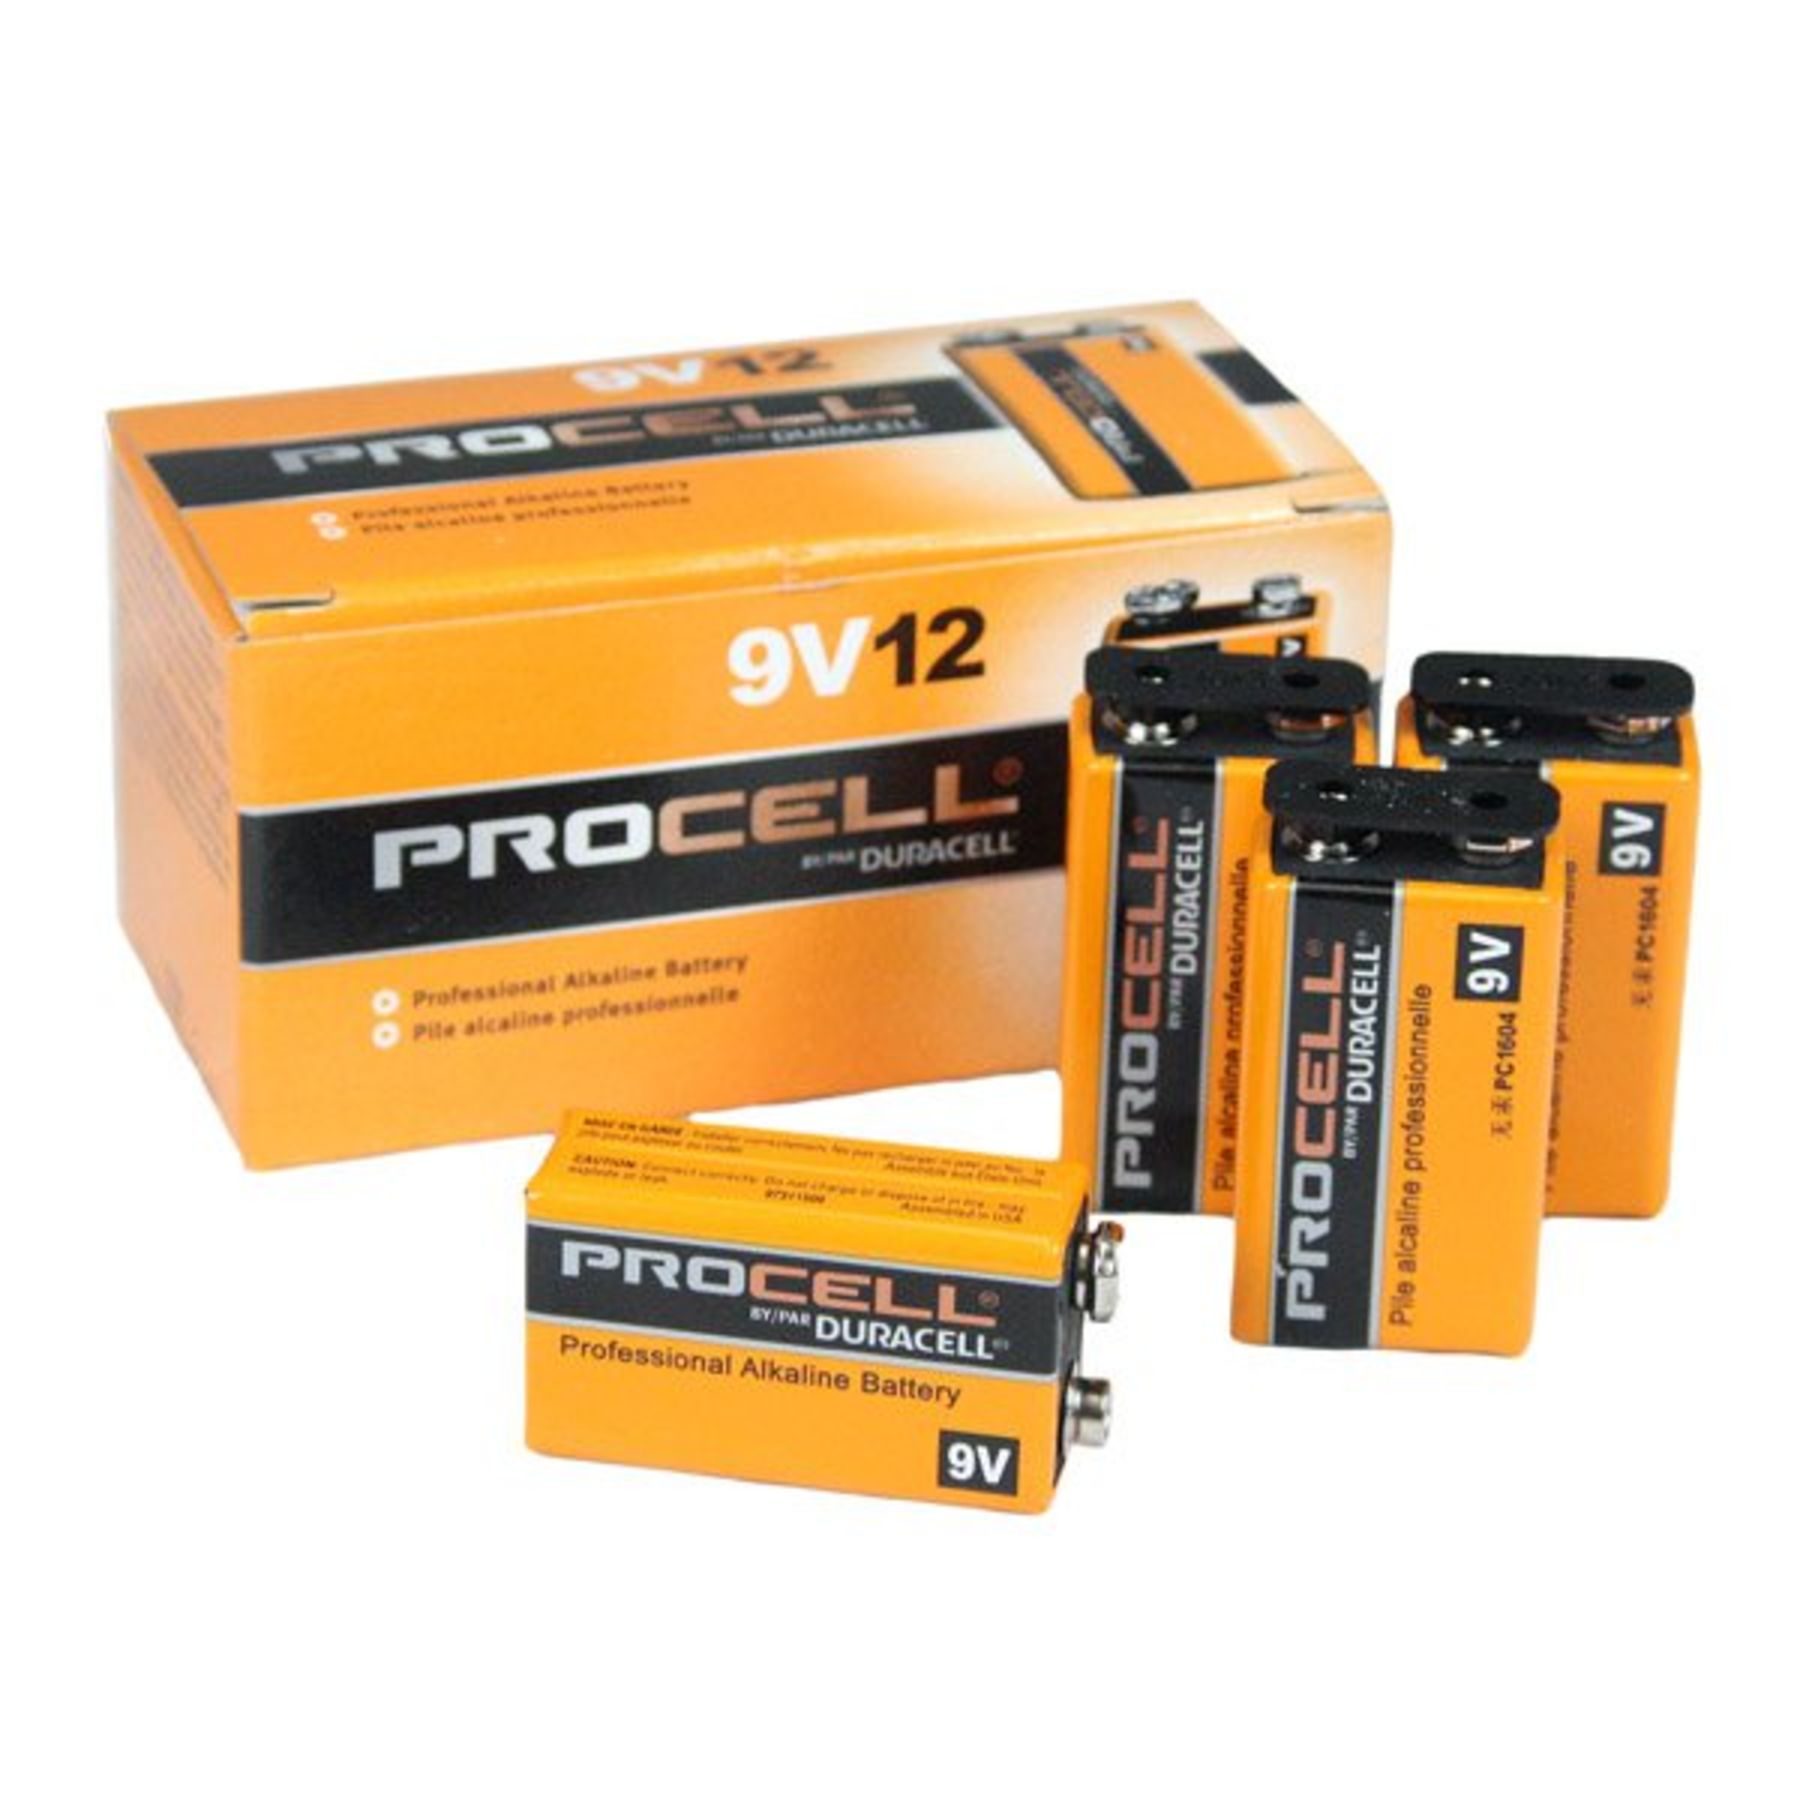 9-Volt Size Duracell® Procell™ Battery